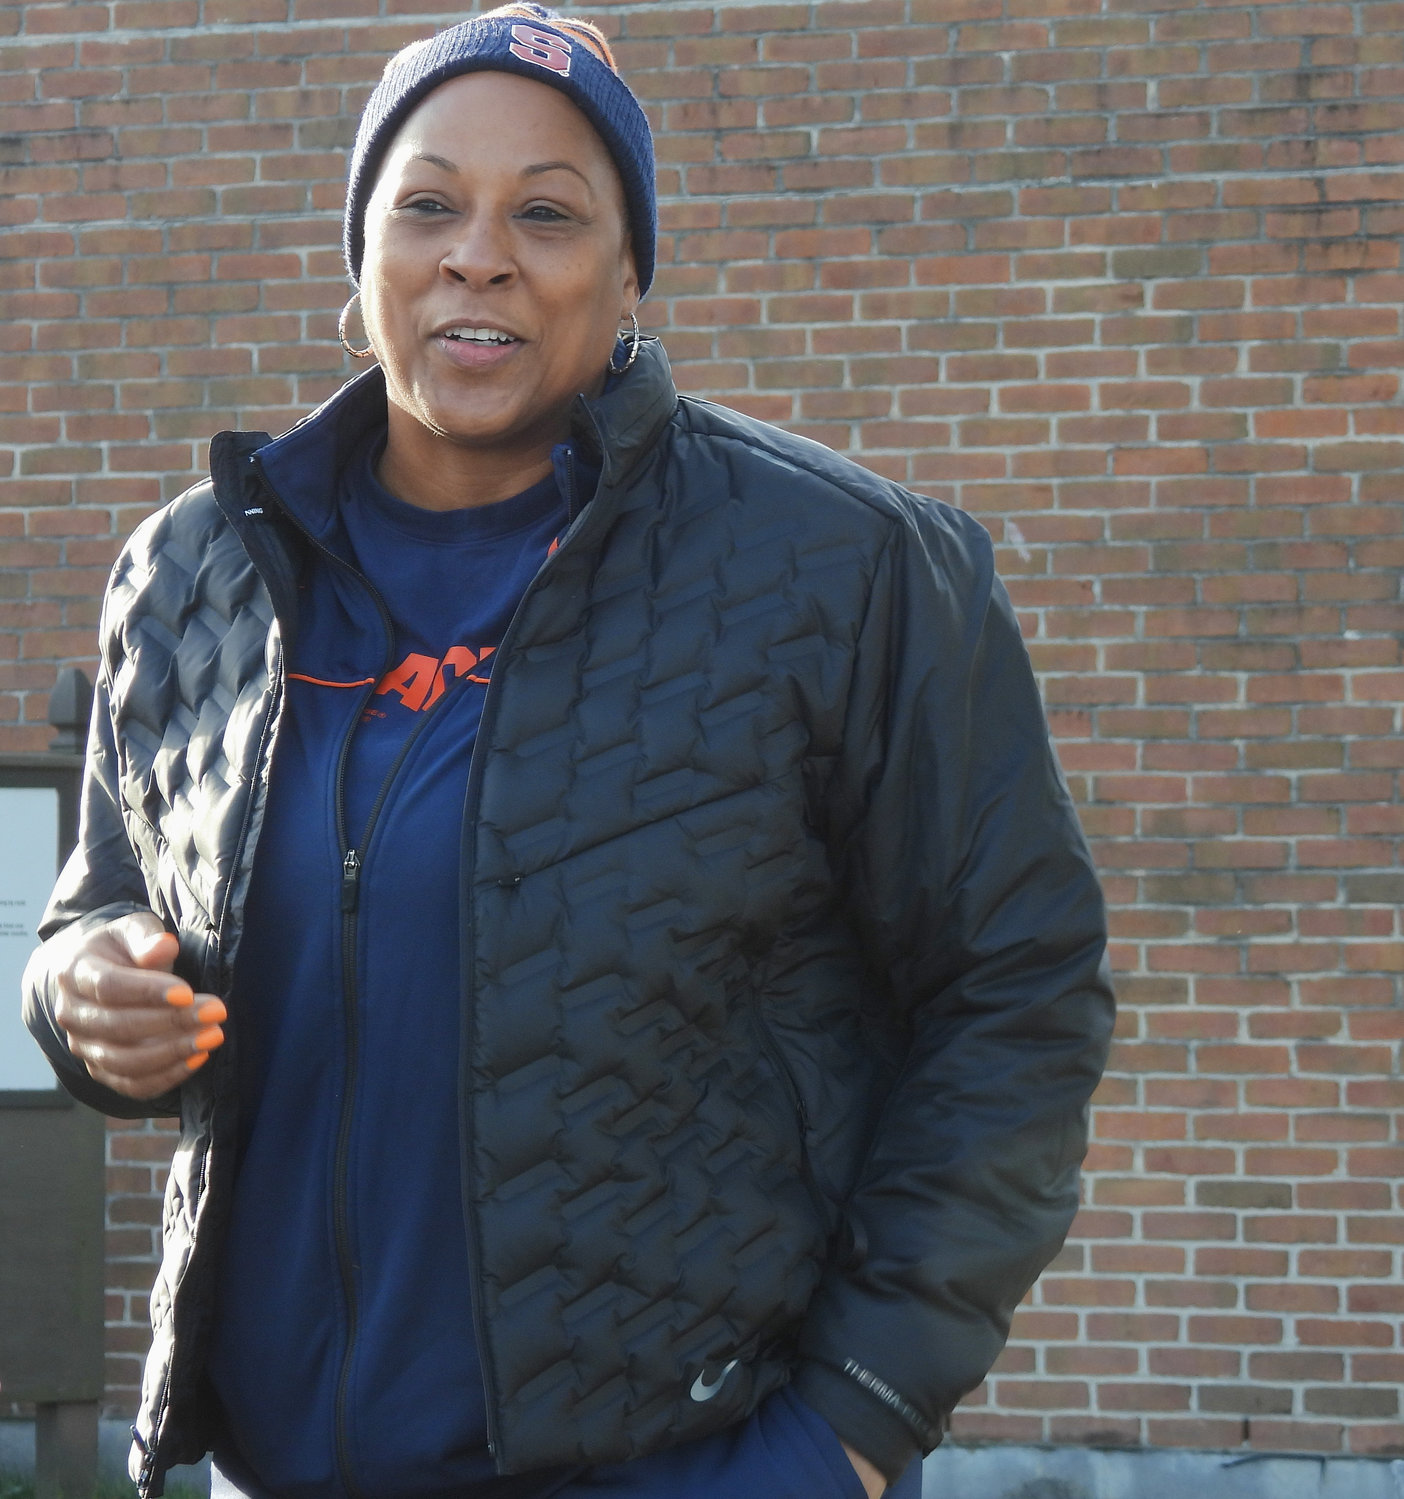 Syracuse University women’s basketball coach Felisha Legette-Jack speaks at the first annual Abolitionist Freedom Walk in Canastota, where people reenacted the journey members of the New York Antislavery Society took after their first meeting ended by an angry mo